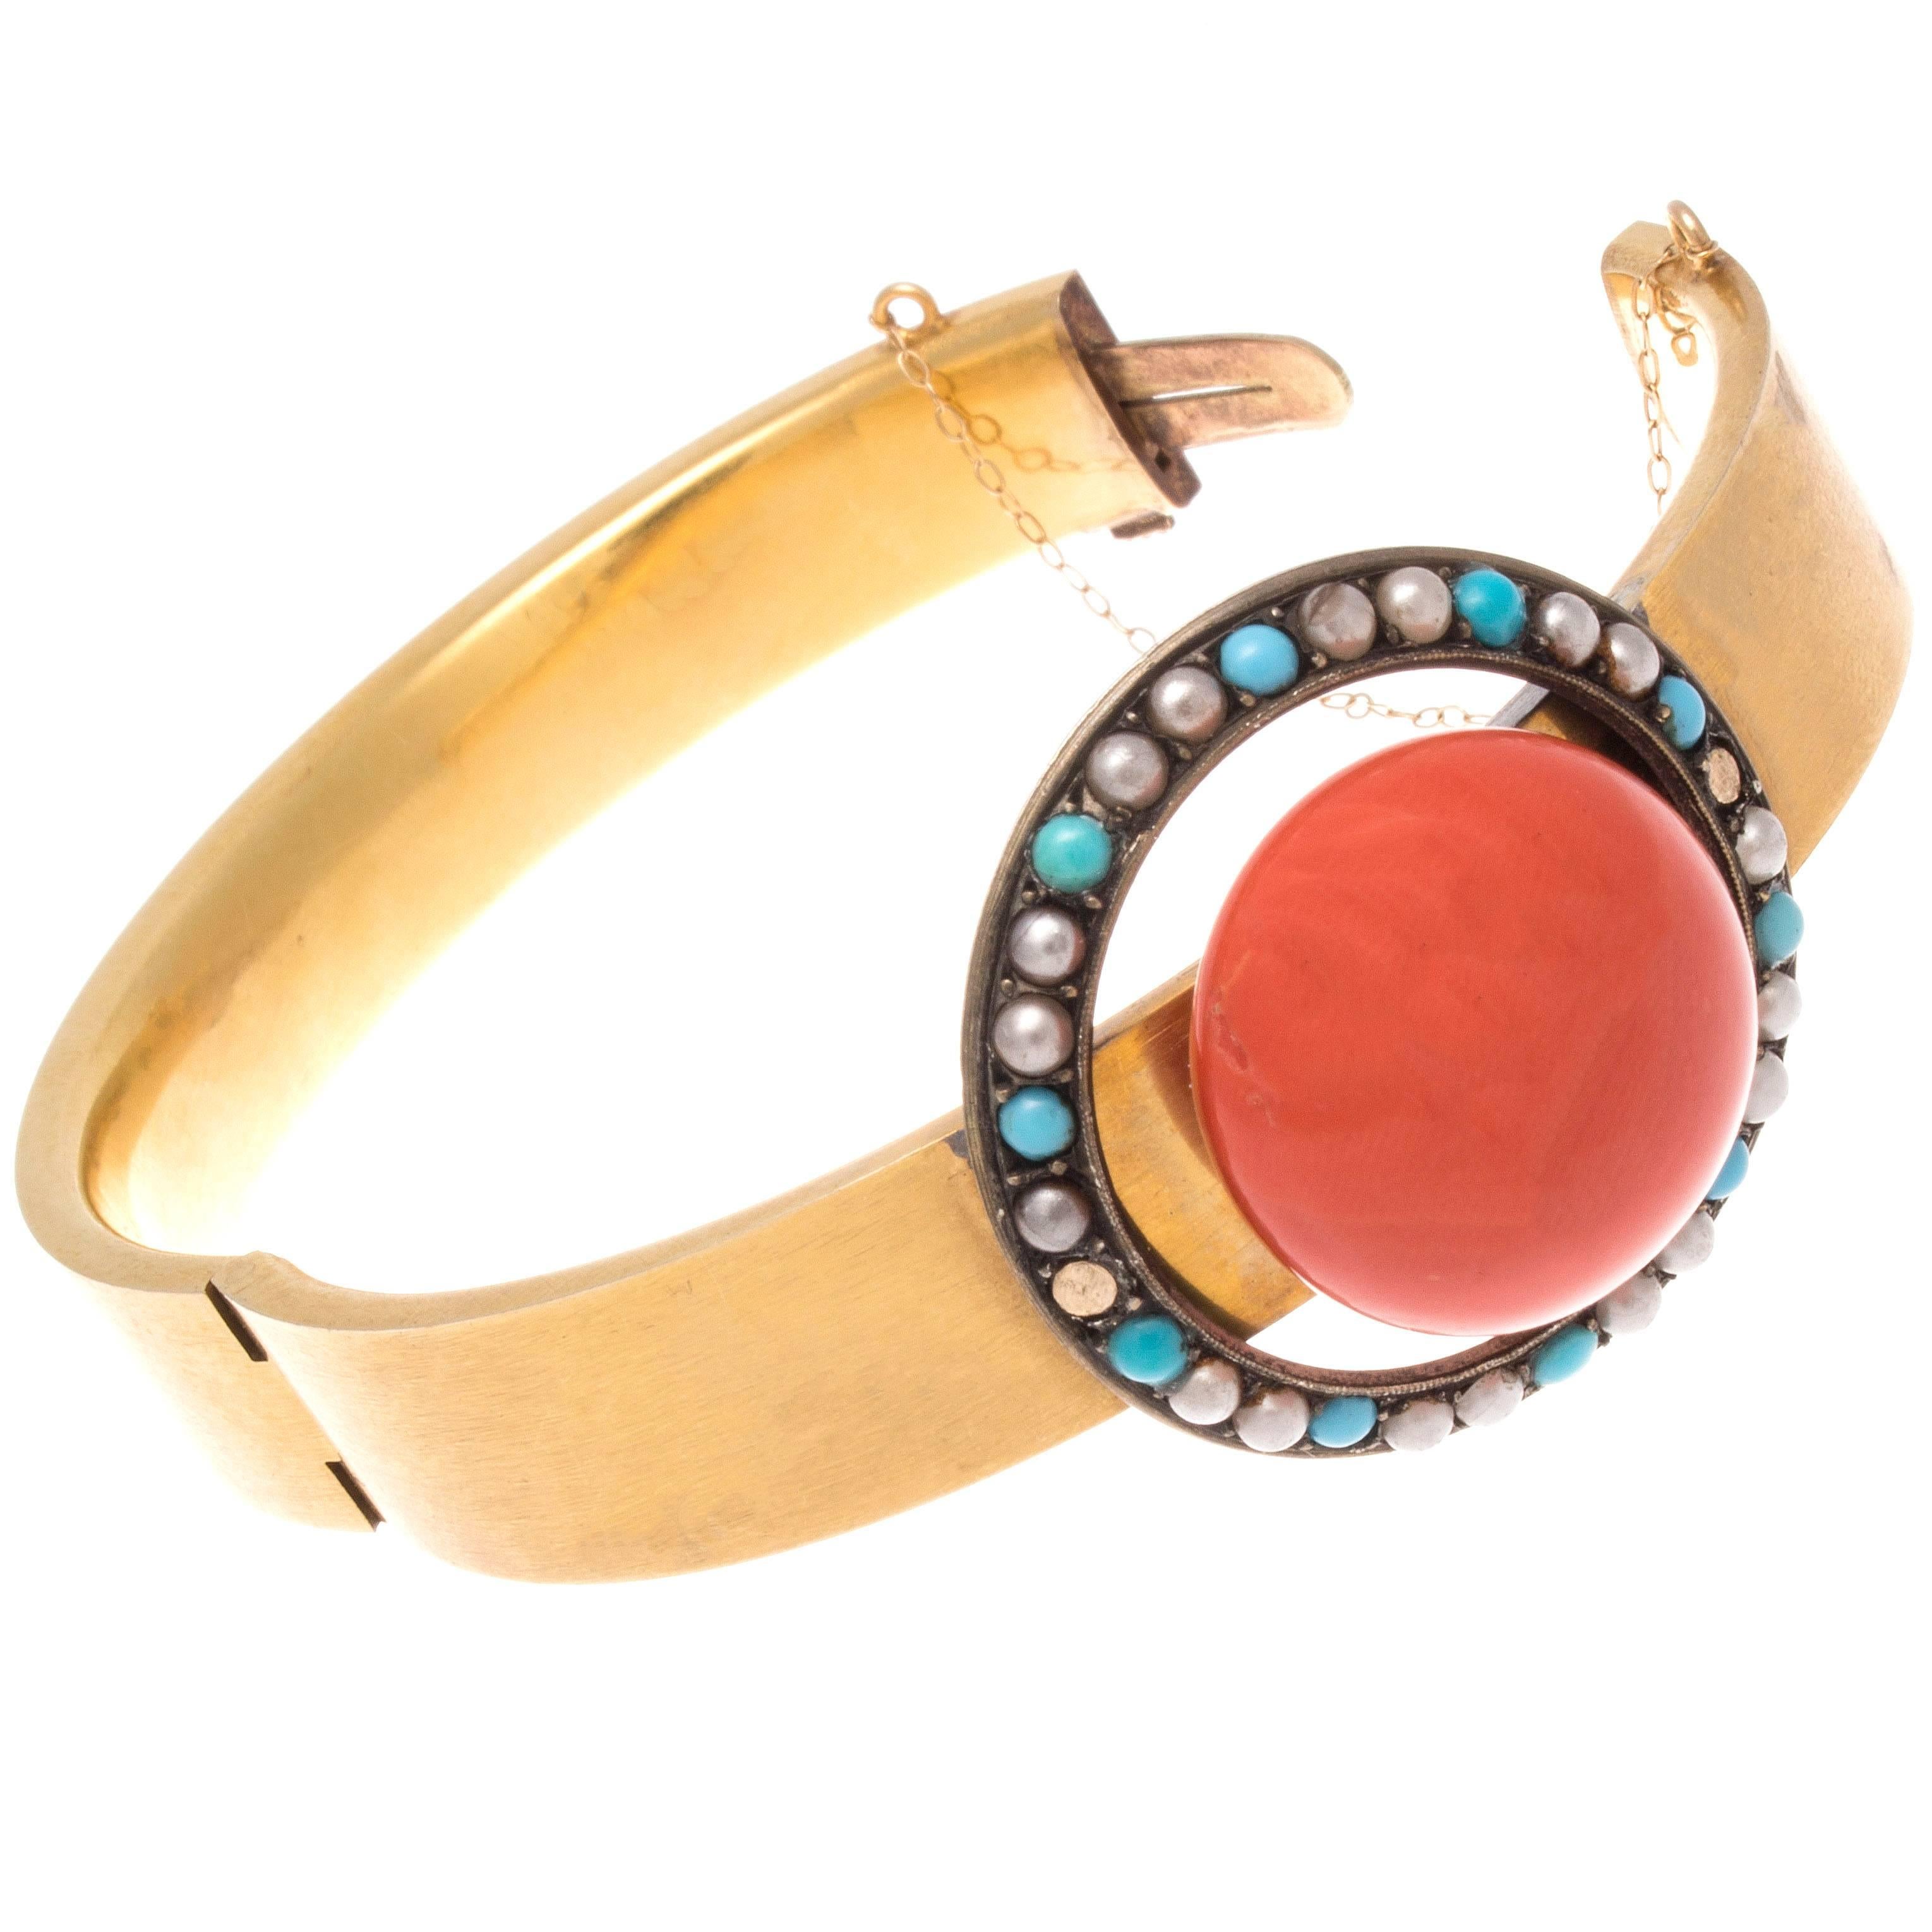 A lovely victorian creation of color. Created with a glowing cabochon orangish-red coral that is surrounded by a halo of bright blue turquoise and creamy pearls. Crafted in 14k gold and silver.

The coral has a diameter of approximately 3/4 of an